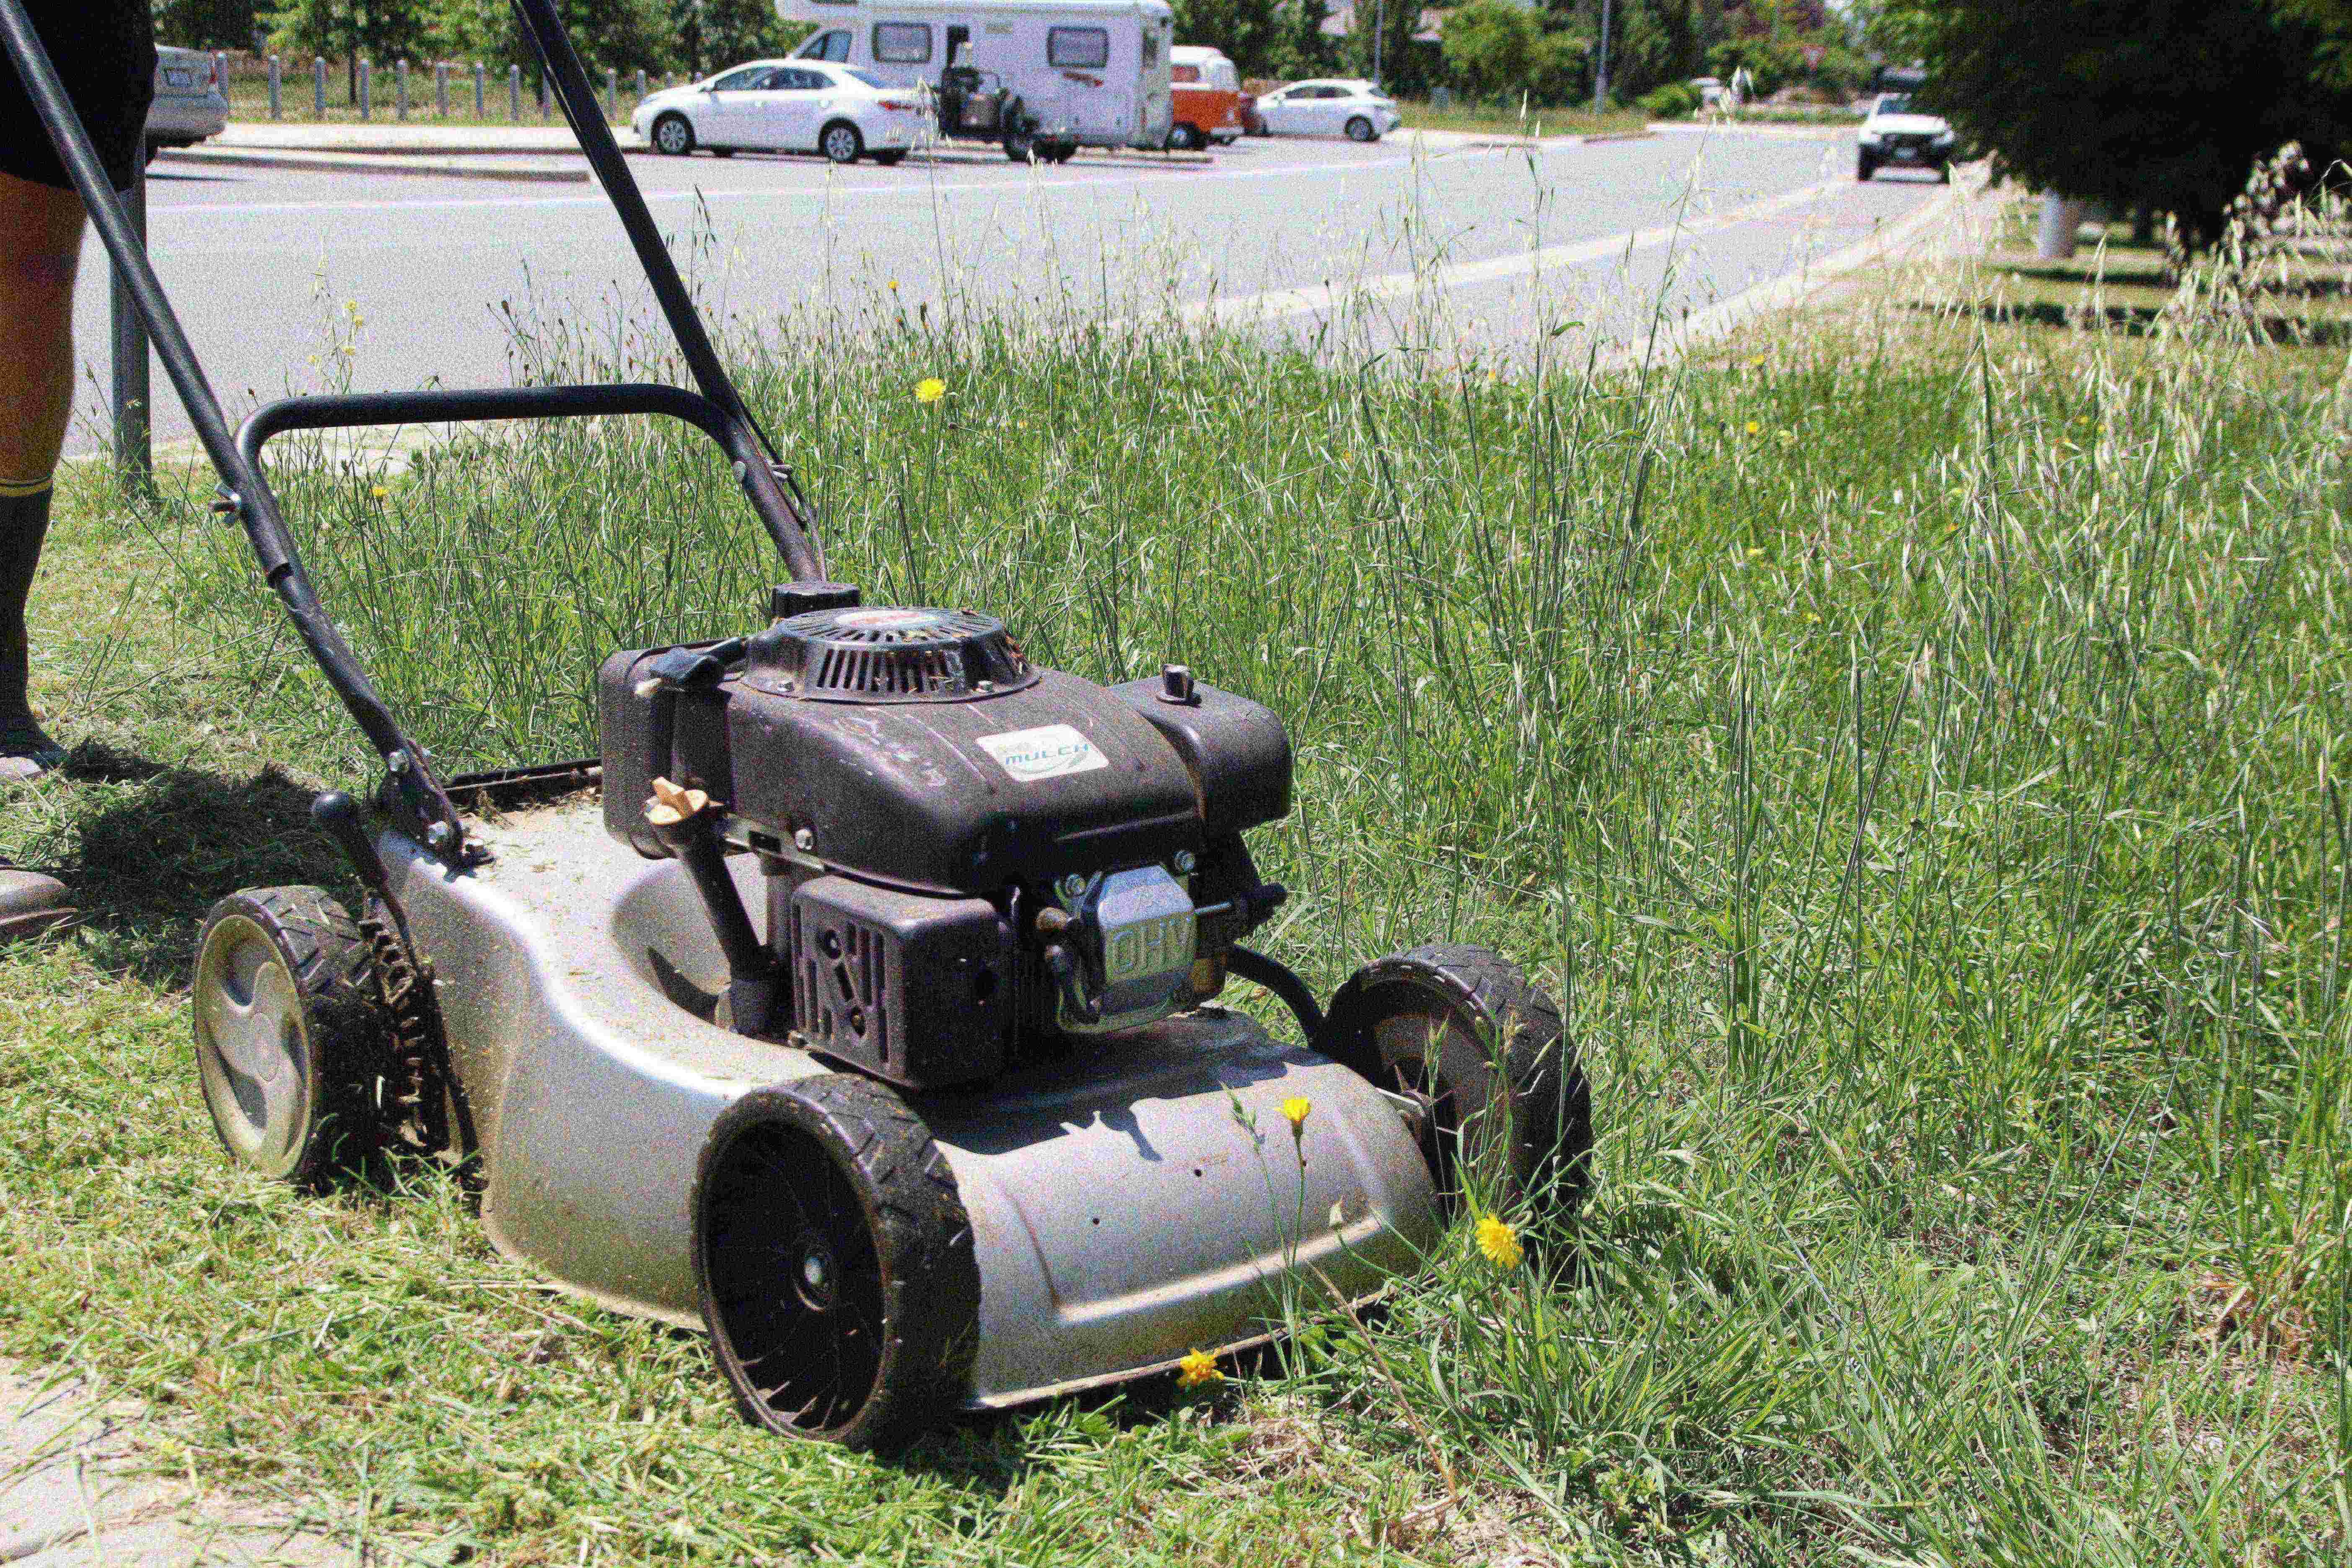 Late lawn mowing, poor parking: frivolous triple-zero calls spark ACT police warning